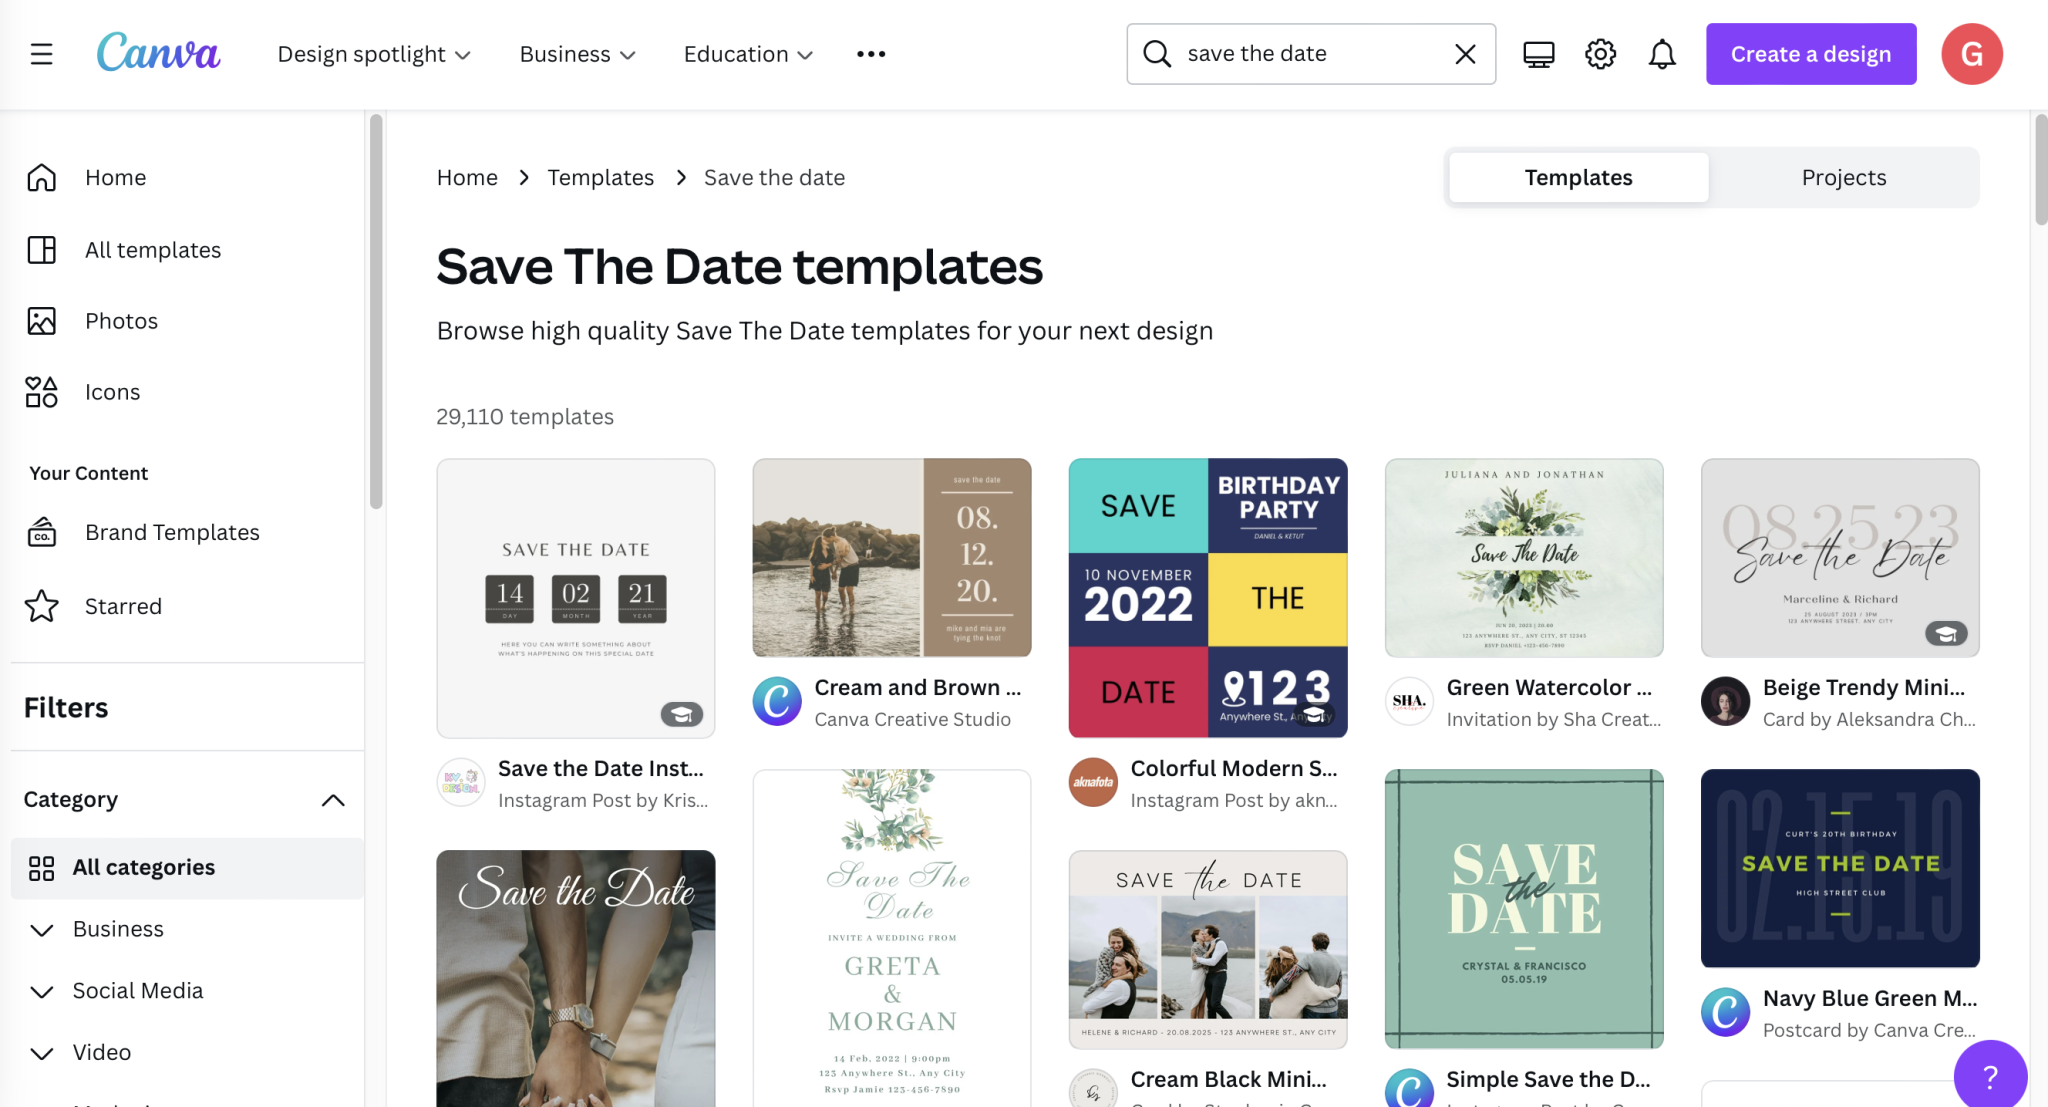 Step 2: Search “Save the Date” template